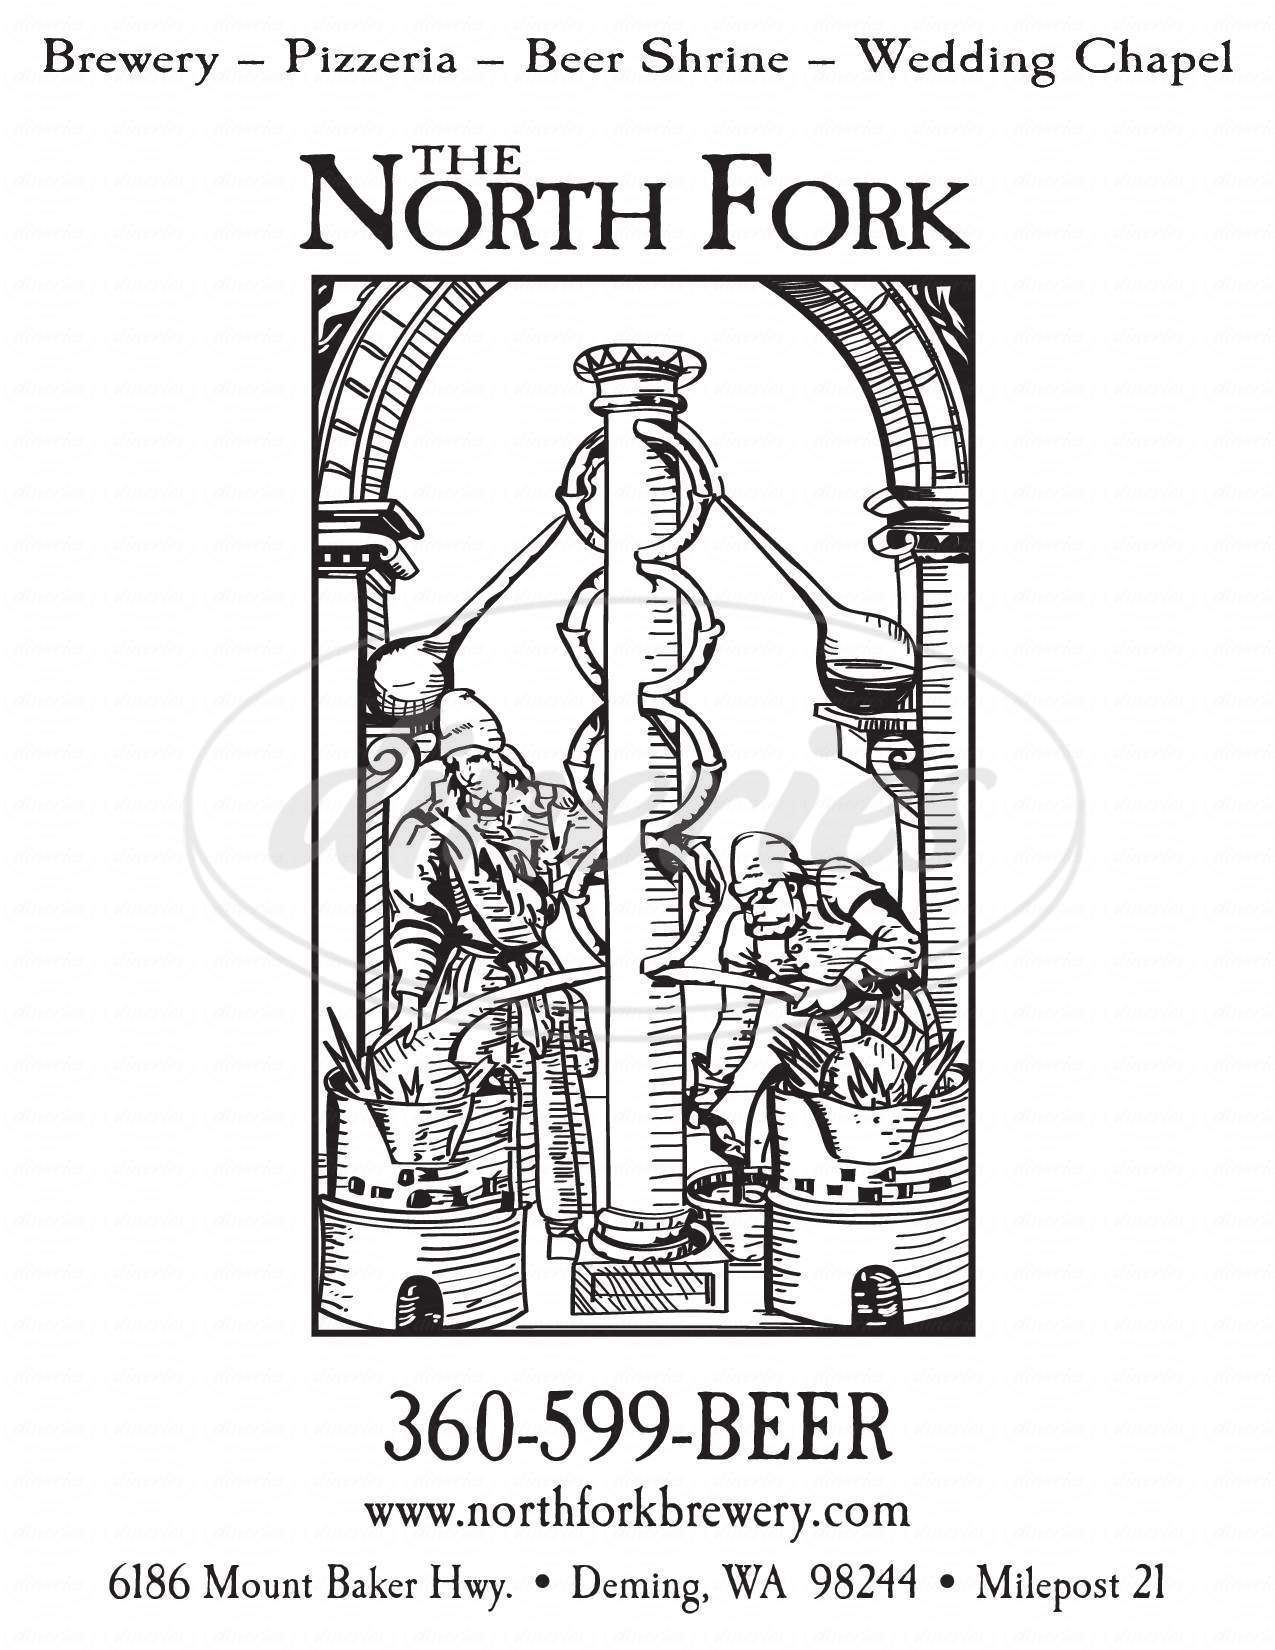 Logo of The North Fork Brewery brewery